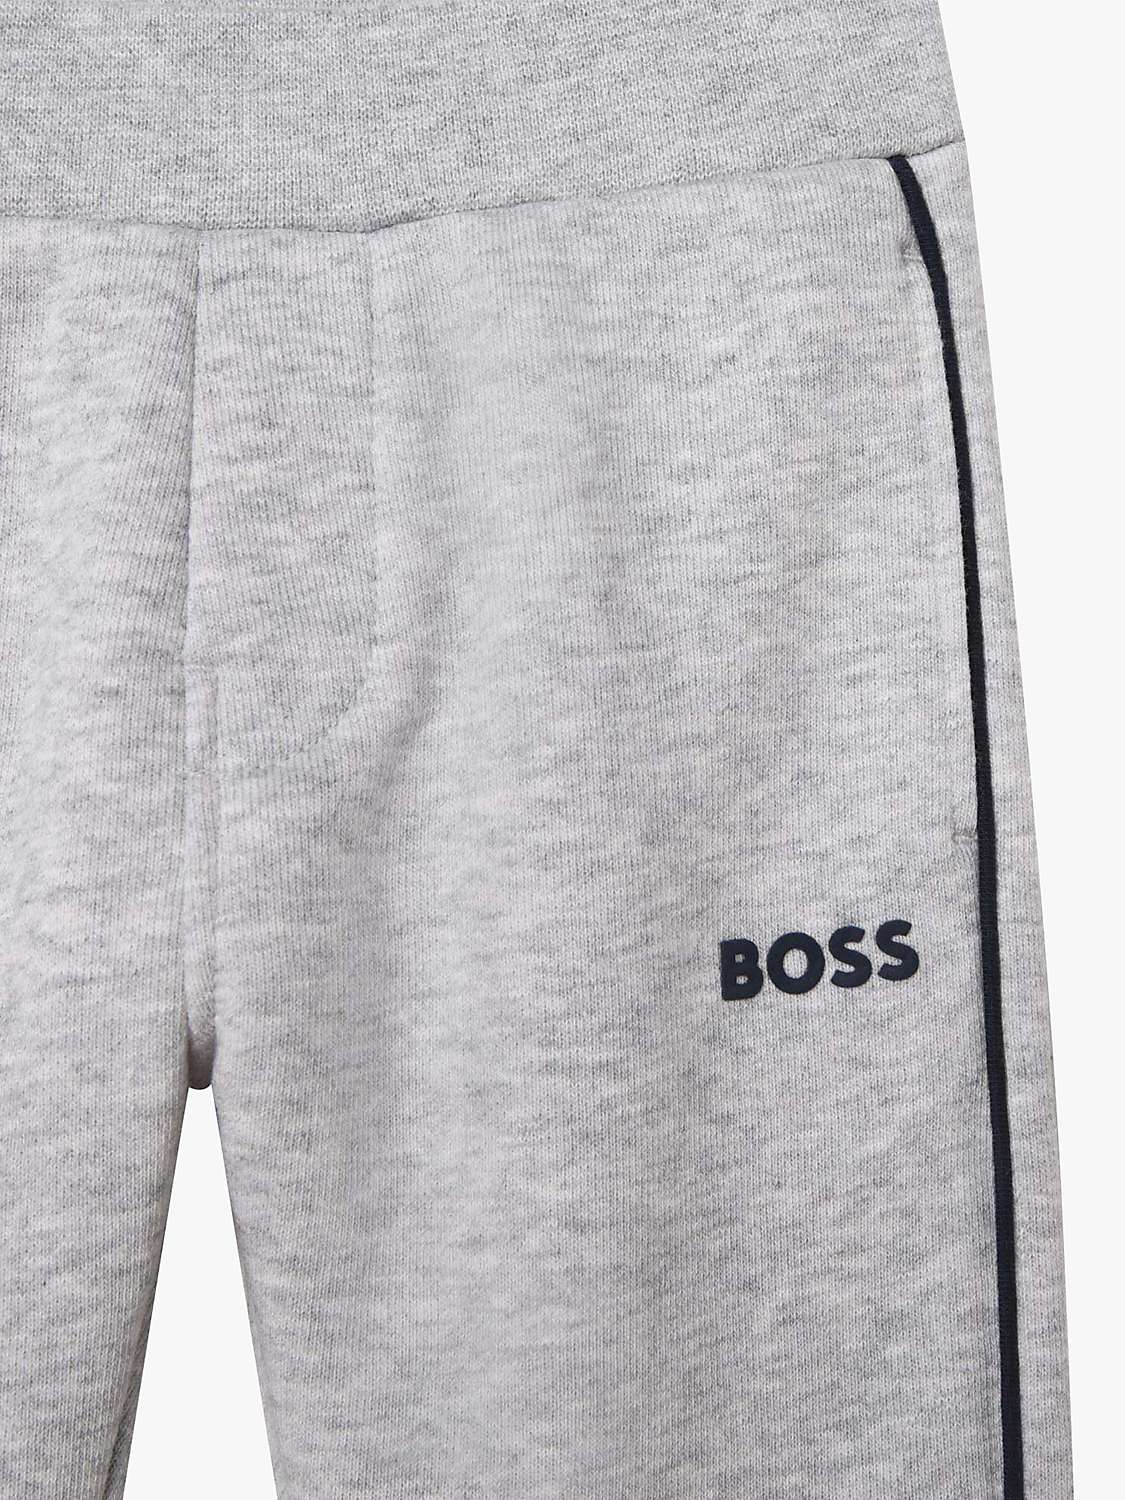 Buy BOSS Baby French Terry Track Trousers, Grey/Multi Online at johnlewis.com